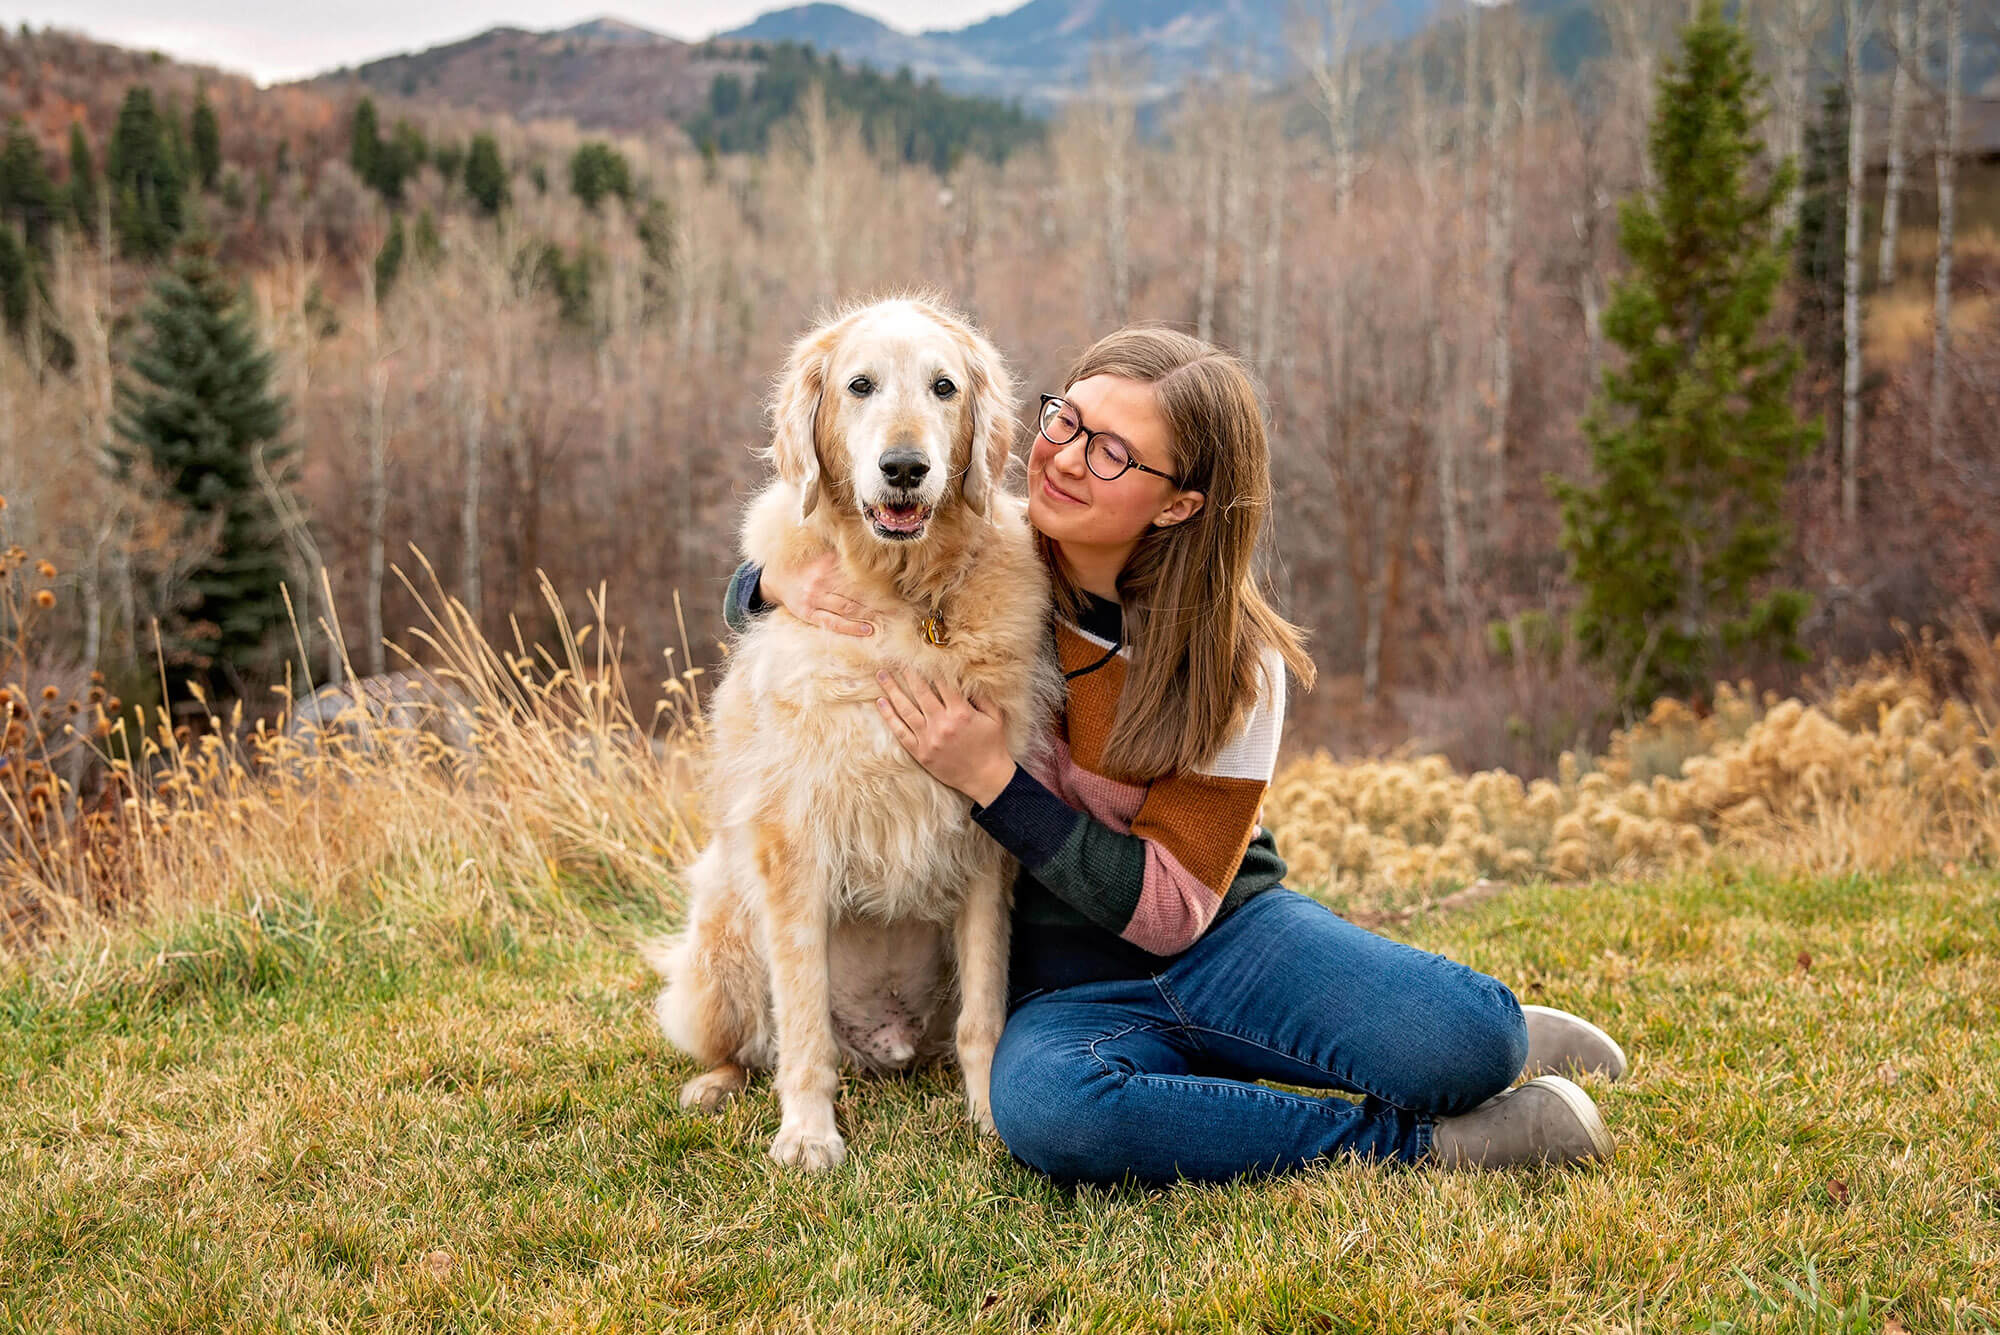 For The Best Puppy And Dog Portrait Photography In Salt Lake, Utah, Visit Dr Liz Now